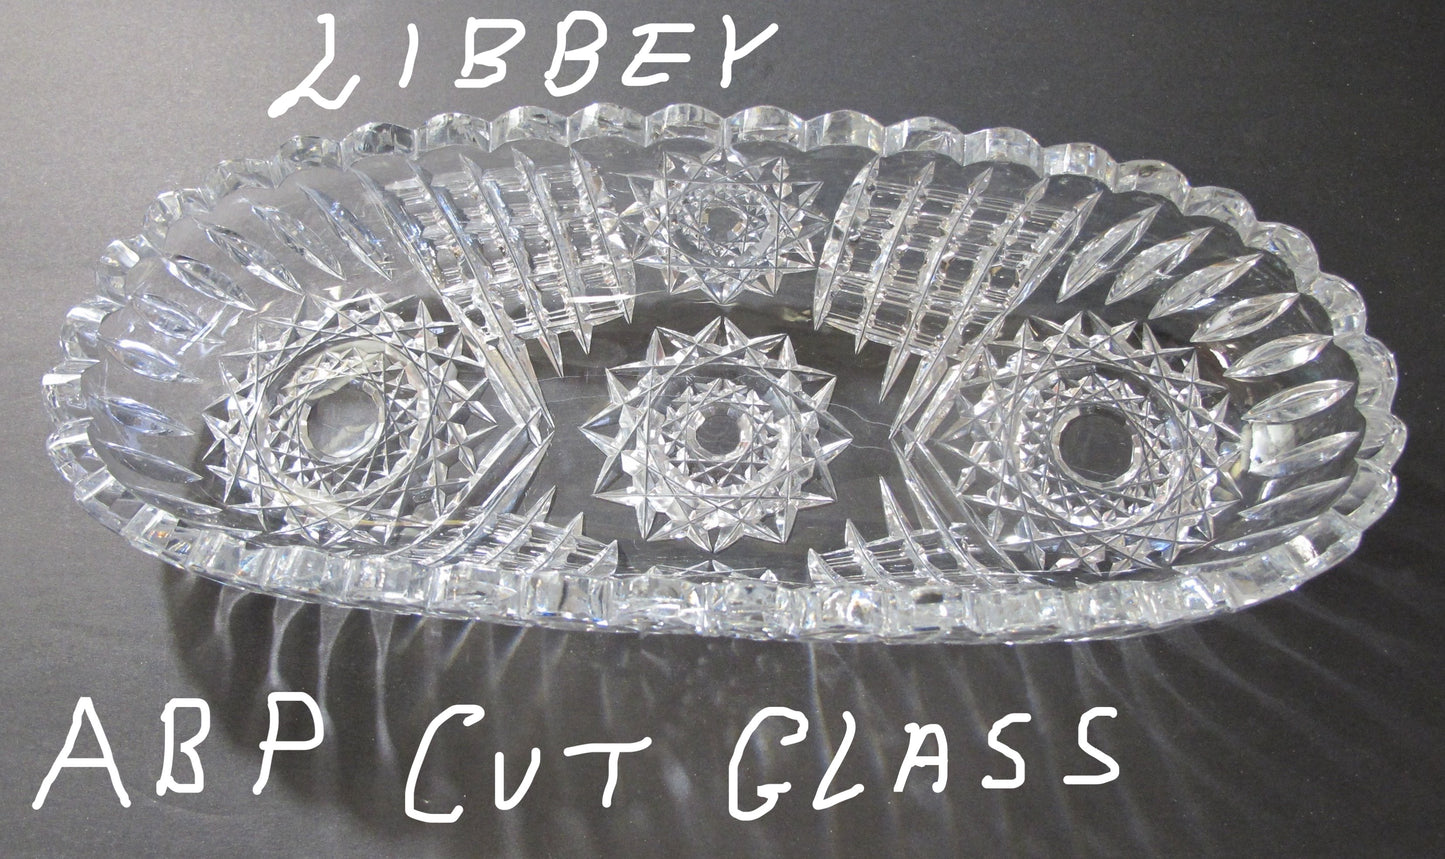 ABP Crystal Cut Glass celery signed Libbey